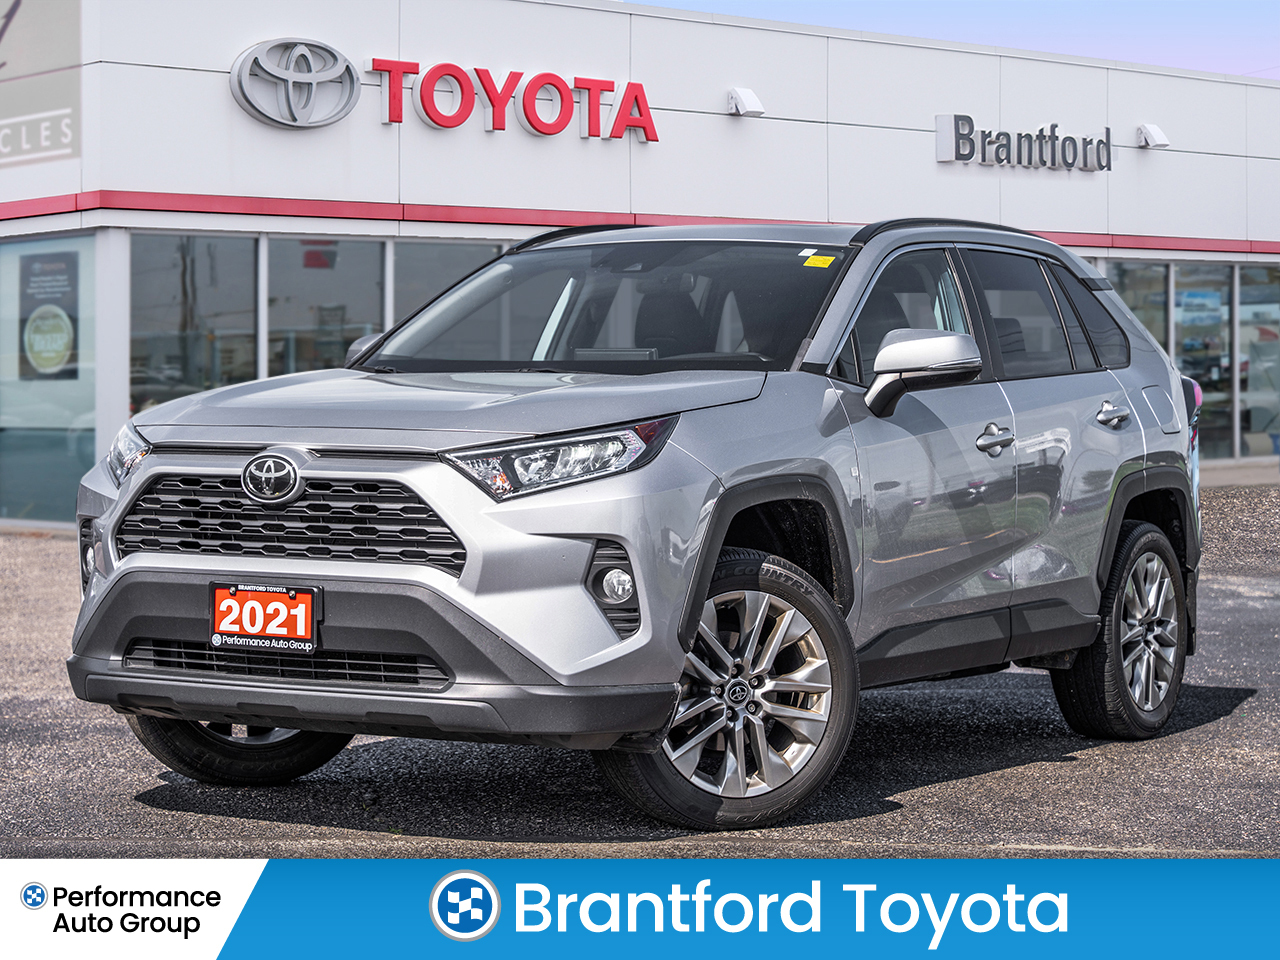 2021 Toyota RAV4 XLE AWD WITH PREMIUM PACKAGE - SILVER ON BLACK